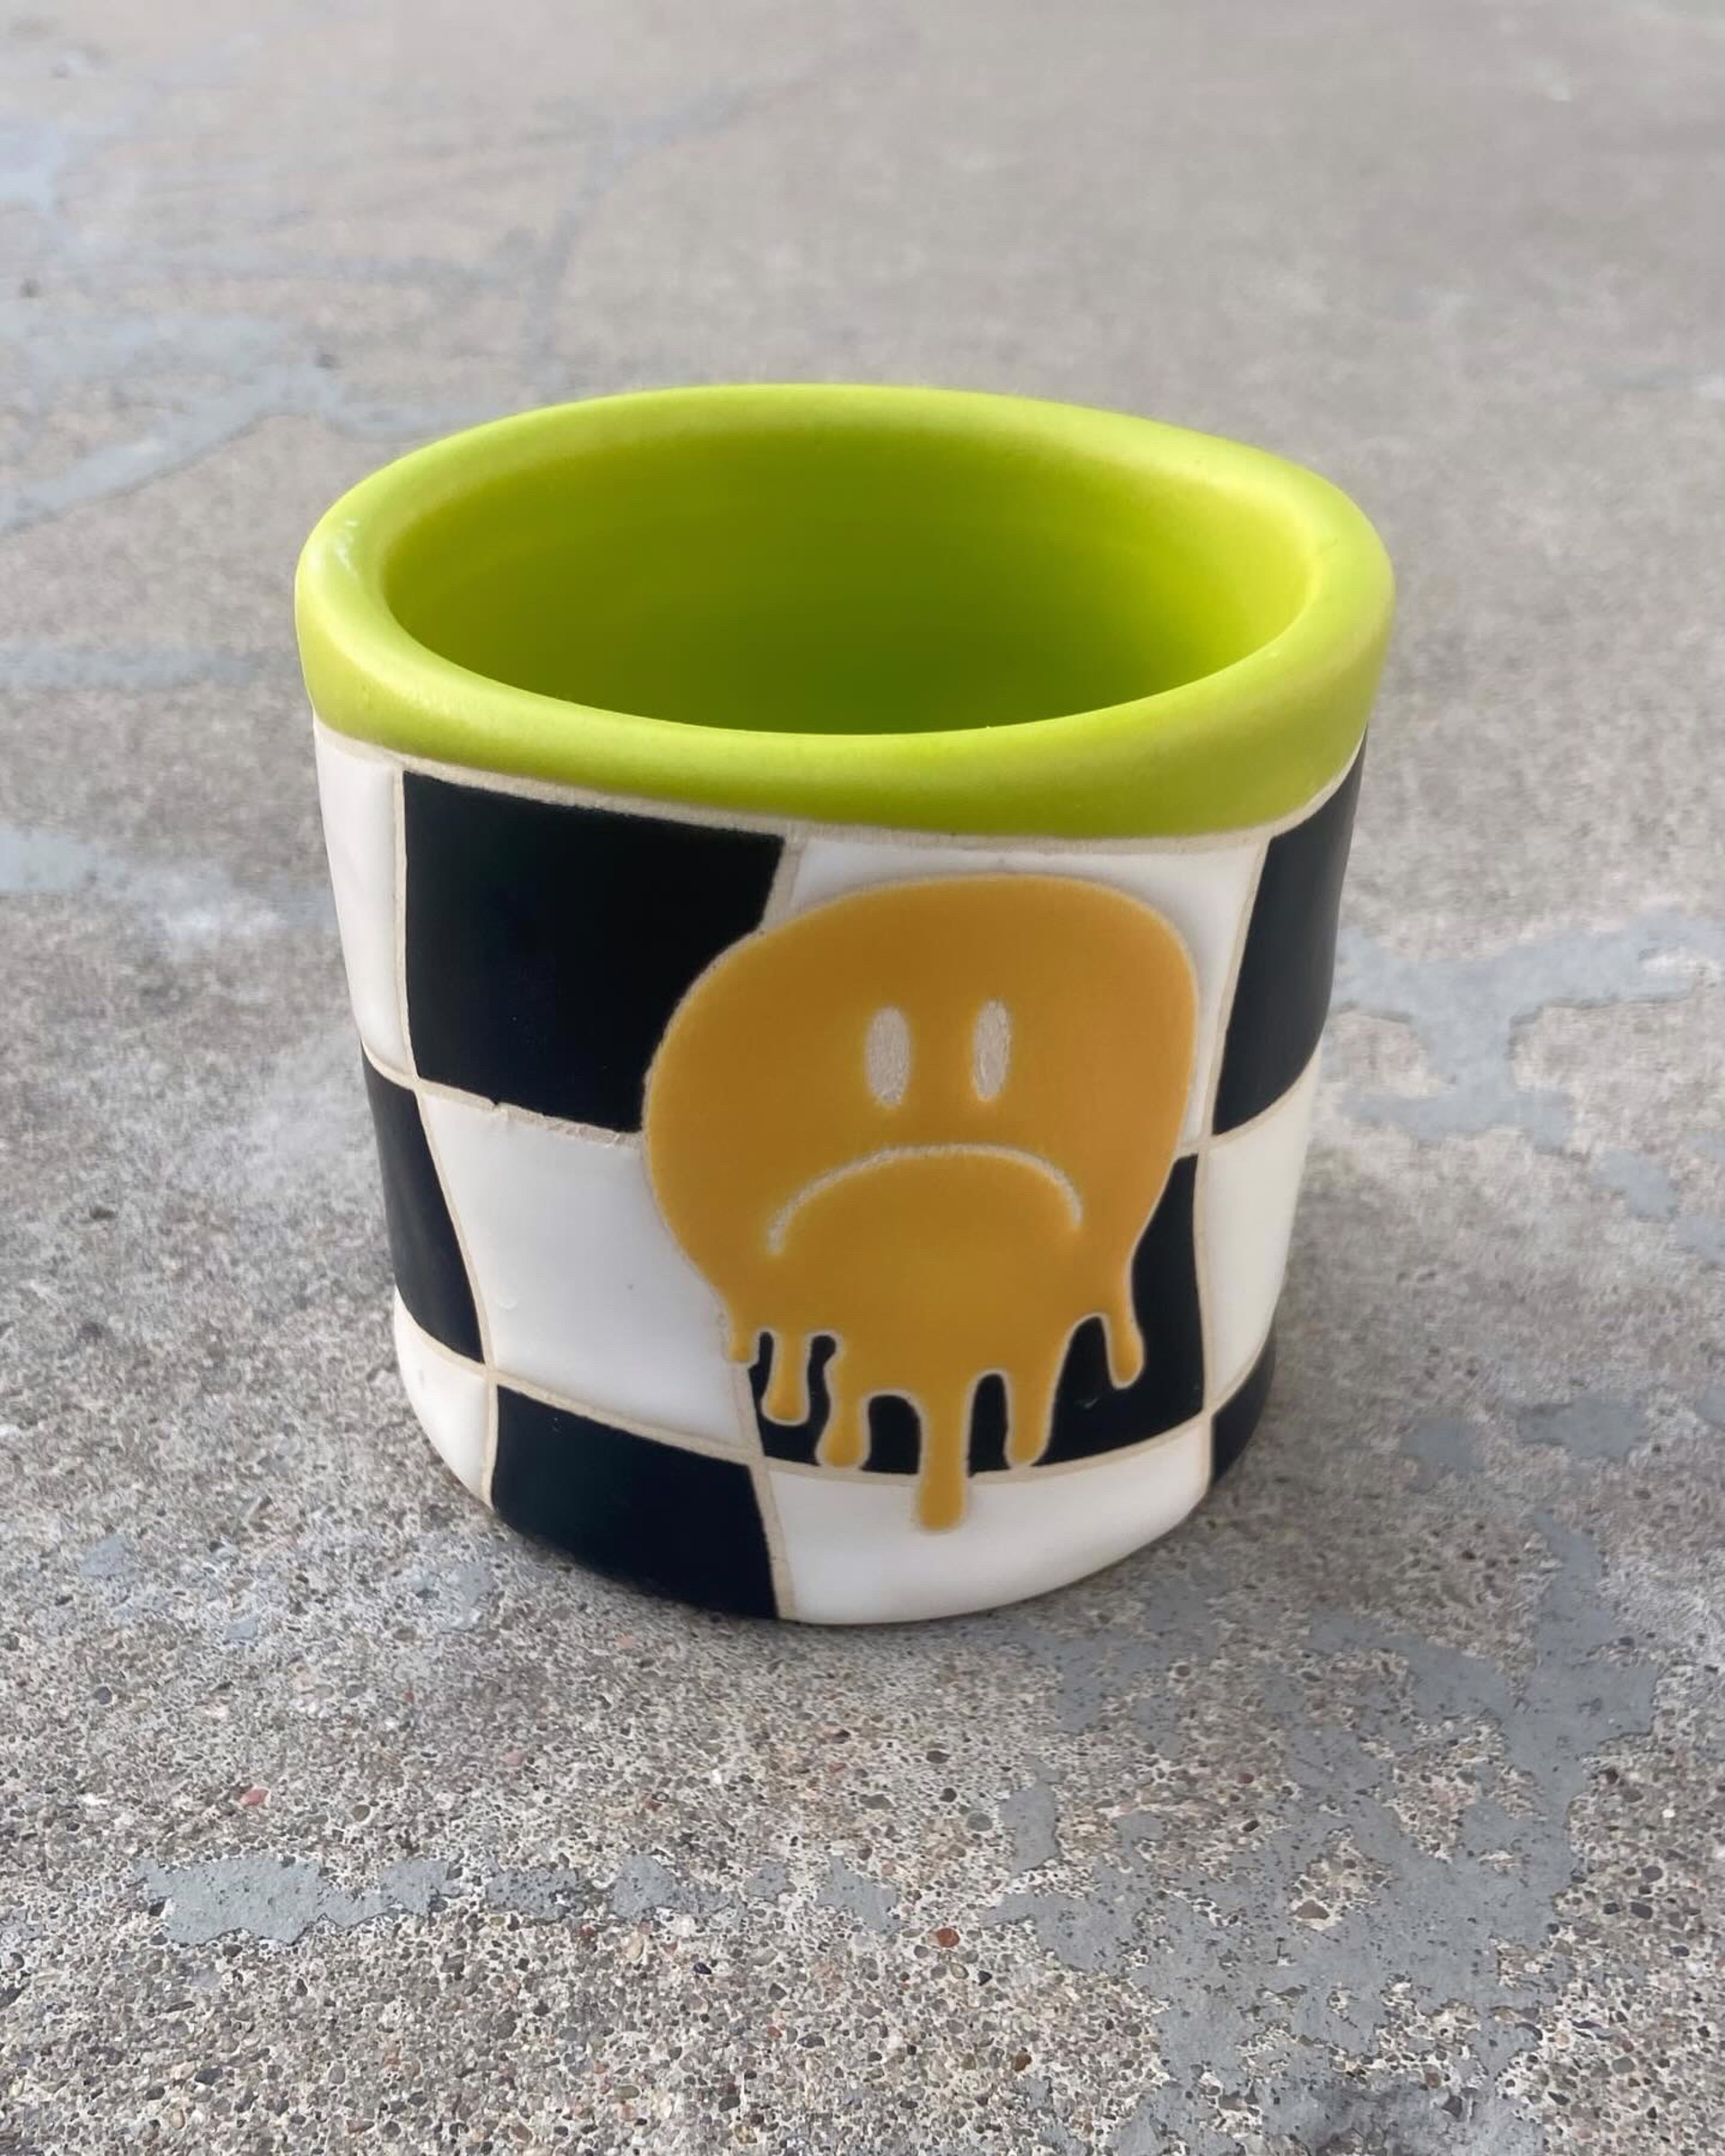 Checkered Big Feelings Cup 01 by Cassie Sullivan